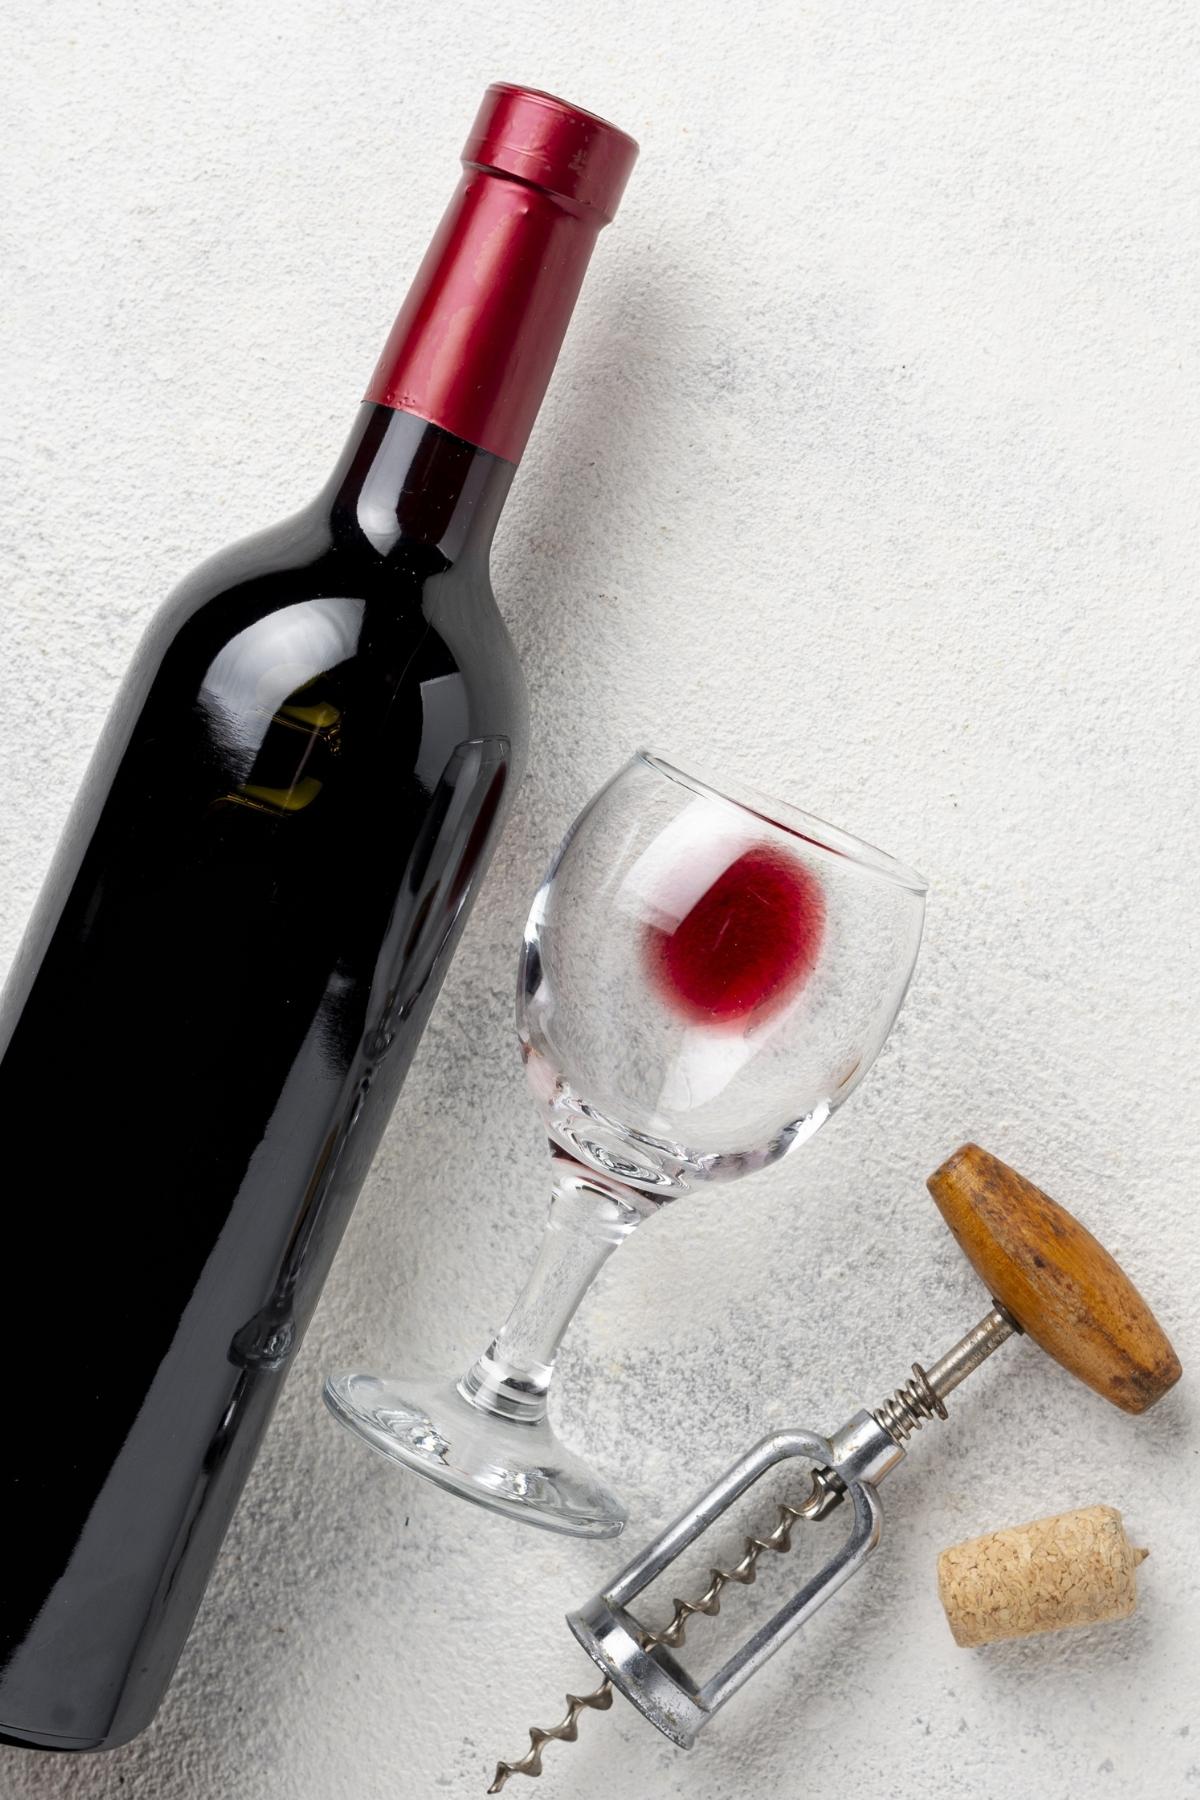 red wine bottle with a glass next to it, and old fashioned bottle opener and a cork.